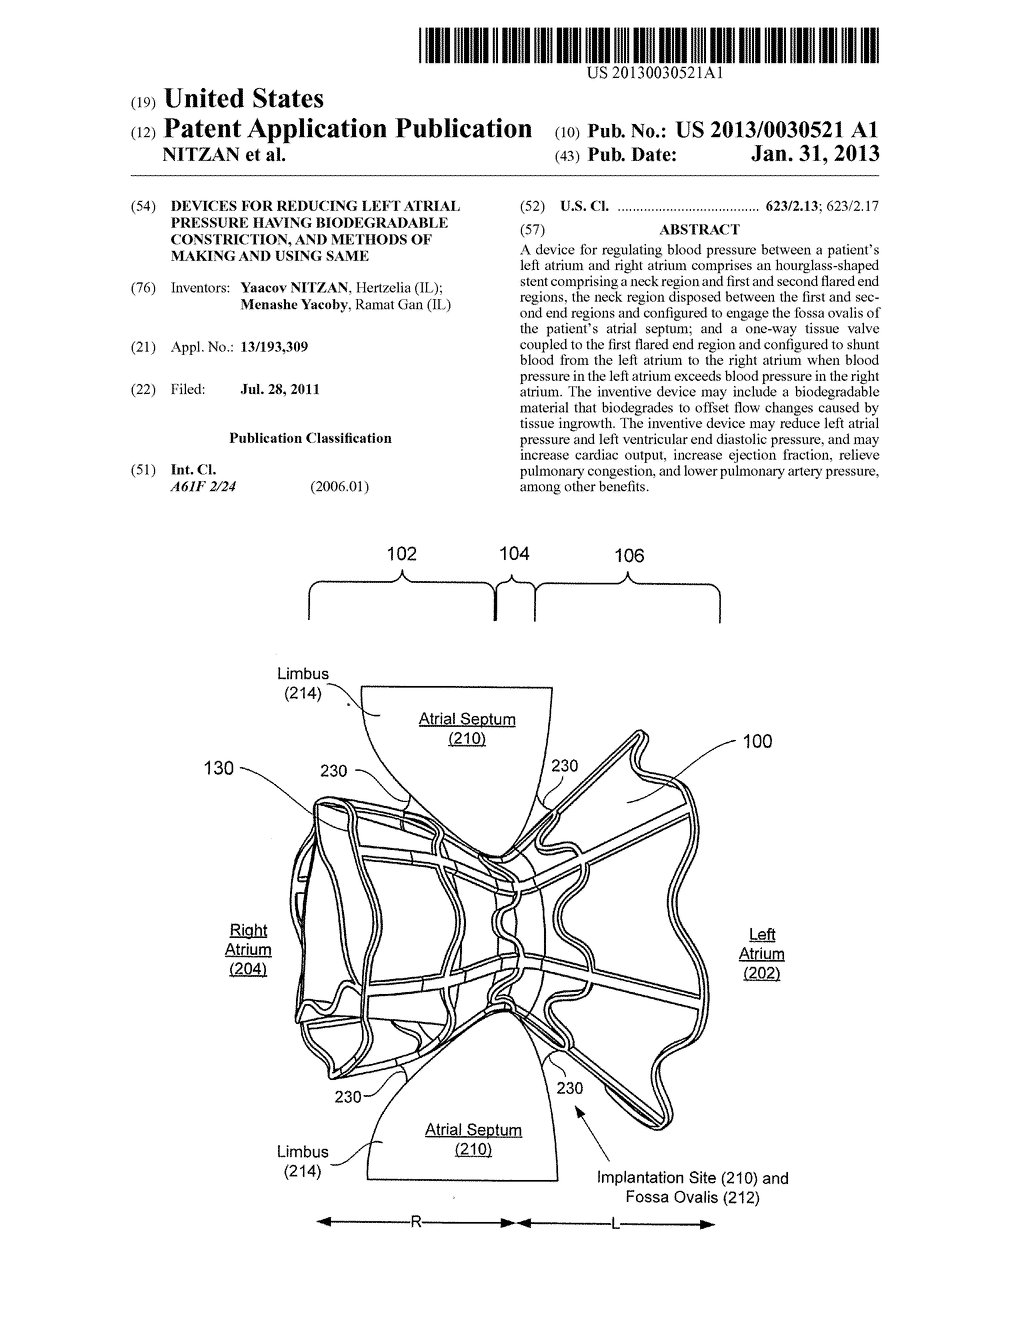 DEVICES FOR REDUCING LEFT ATRIAL PRESSURE HAVING BIODEGRADABLE     CONSTRICTION, AND METHODS OF MAKING AND USING SAME - diagram, schematic, and image 01